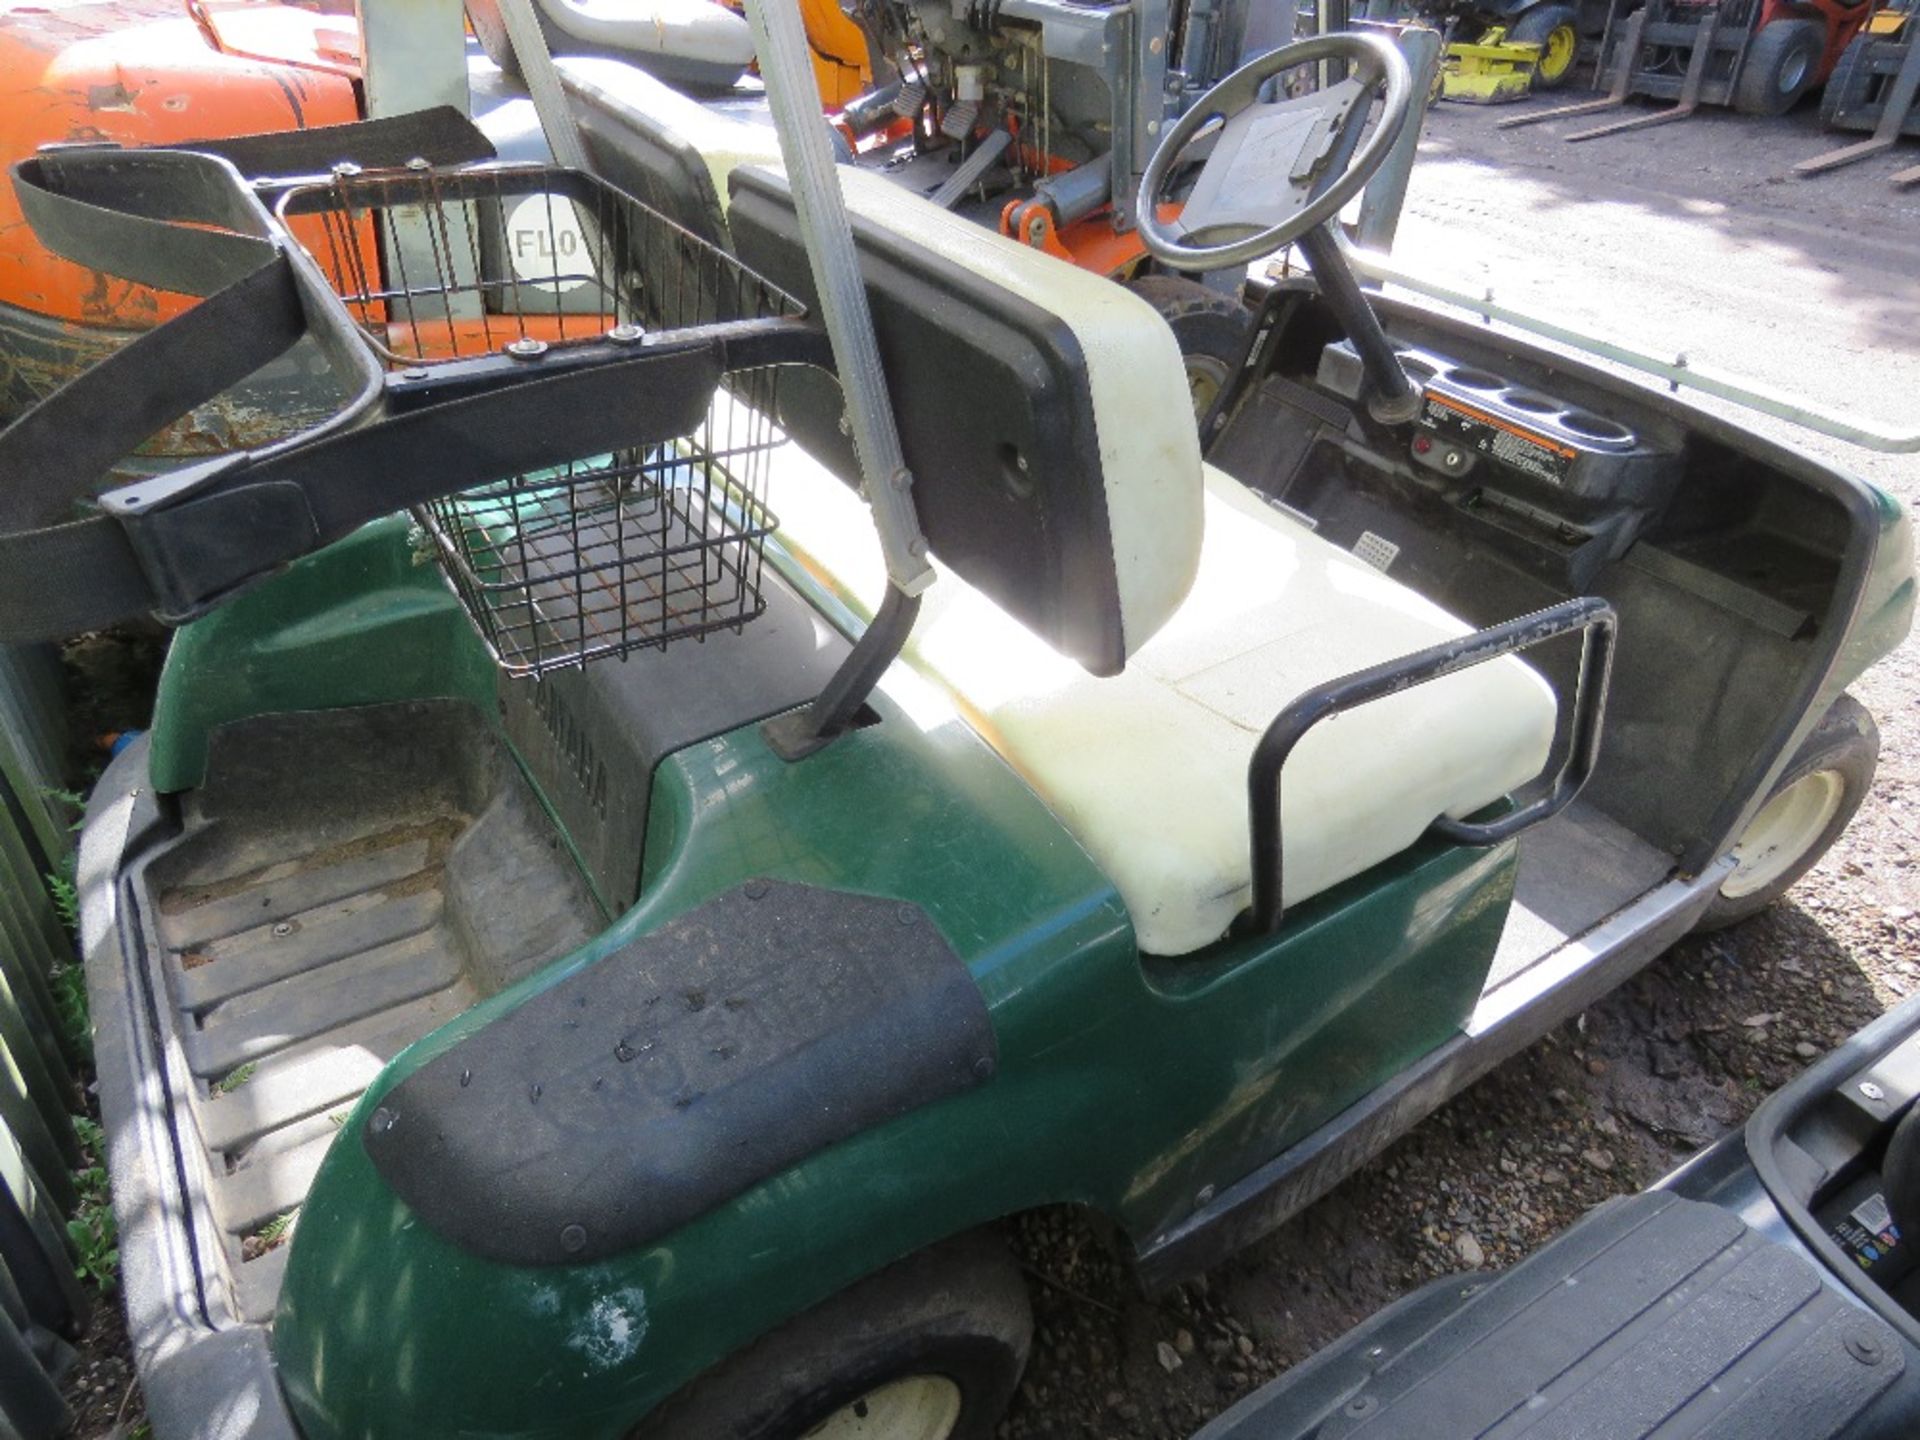 YAMAHA PETROL ENGINED GOLF BUGGY. WHEN TESTED WAS SEEN TO RUN AND DRIVE...SEE VIDEO. - Image 4 of 8